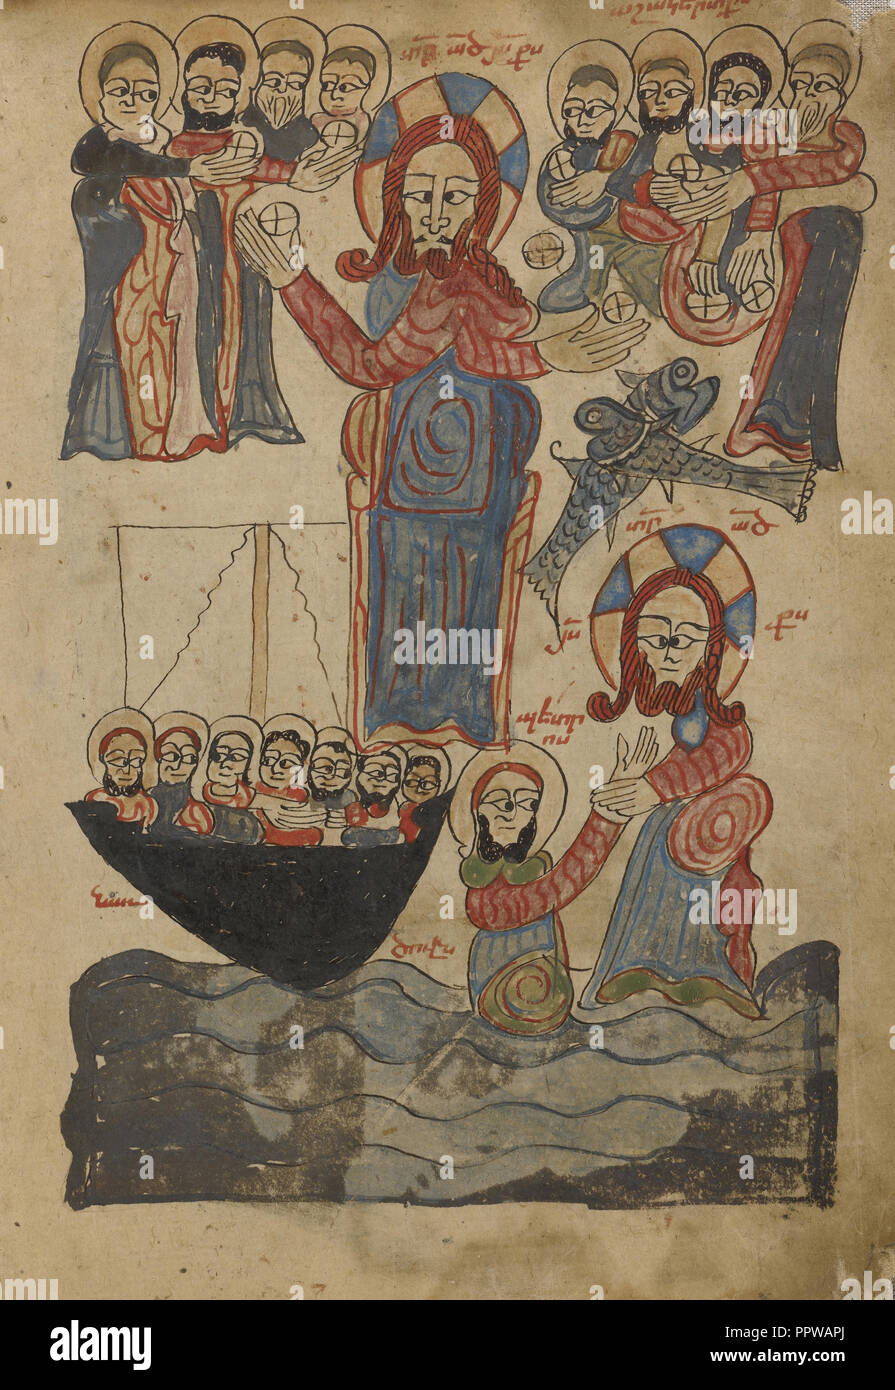 The Feeding of the Five Thousand; Jesus Walking on the Water; Lake Van, Turkey; 1386; Black ink and watercolors on paper Stock Photo